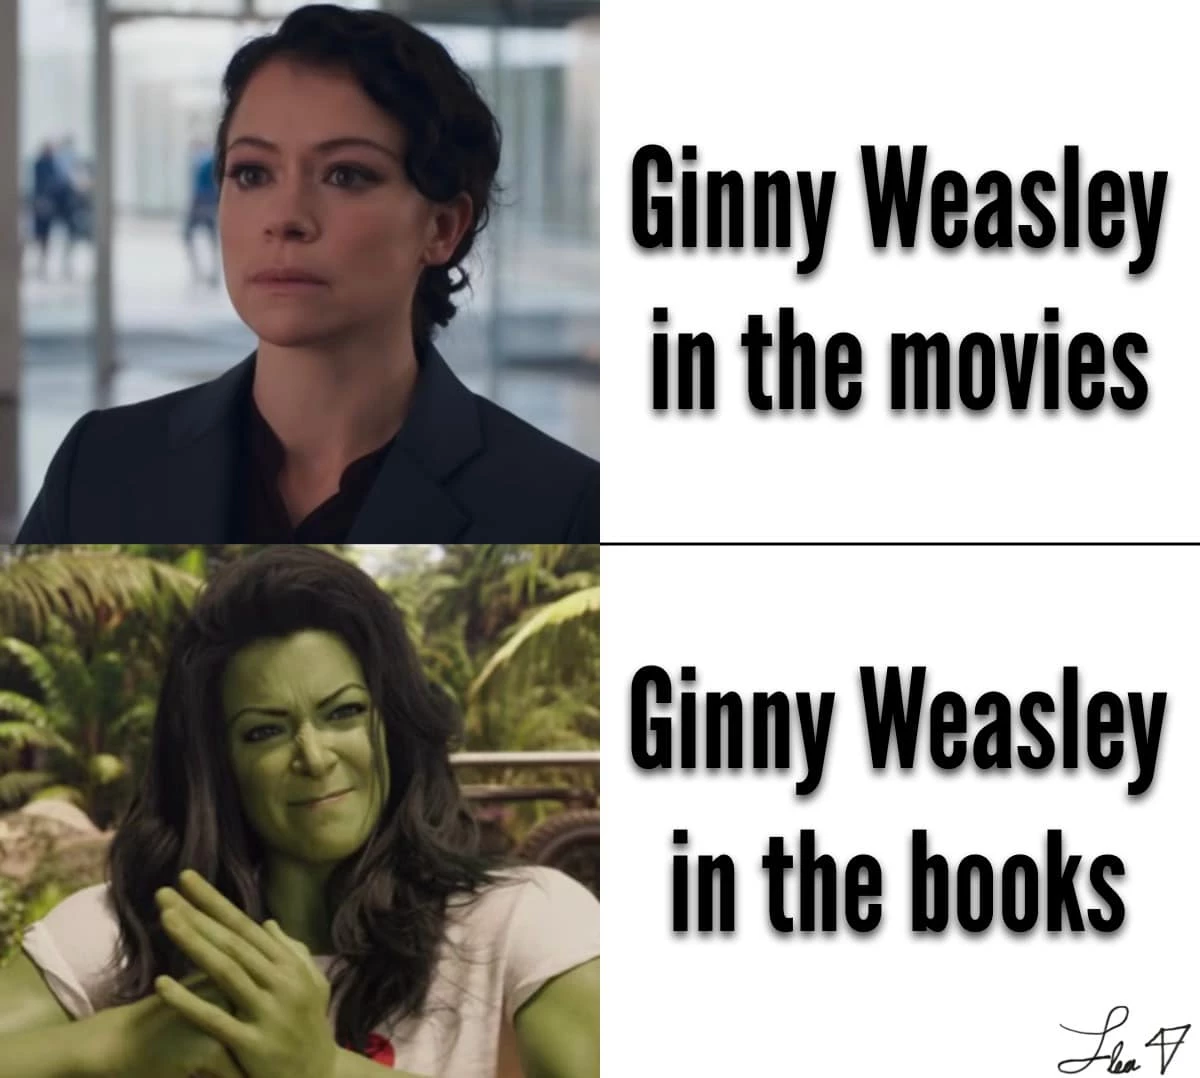 Ginny Weasley In The Books Is Better. Change My Mind